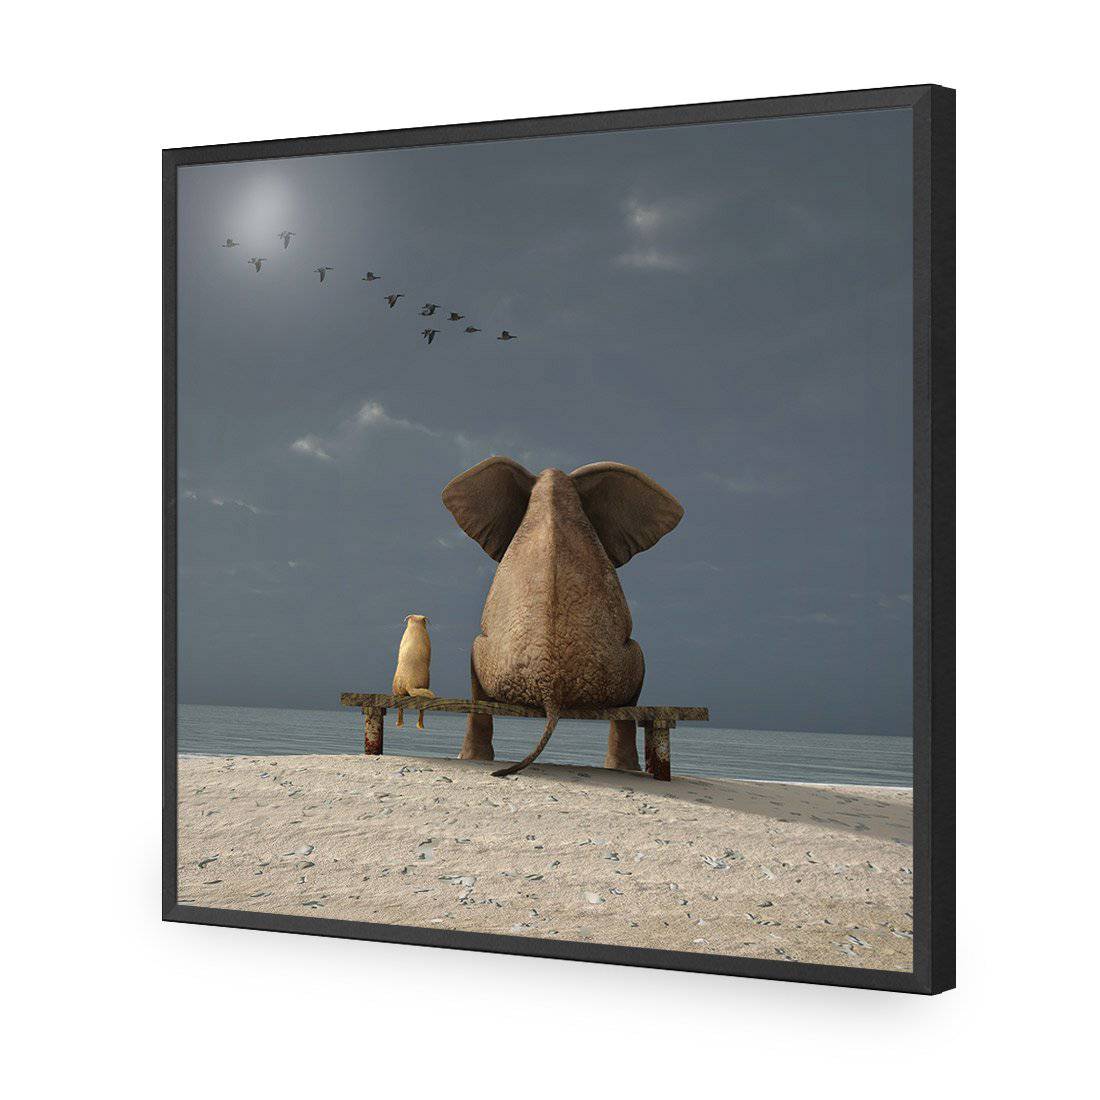 Little And Large, Square-Acrylic-Wall Art Design-Without Border-Acrylic - Black Frame-37x37cm-Wall Art Designs